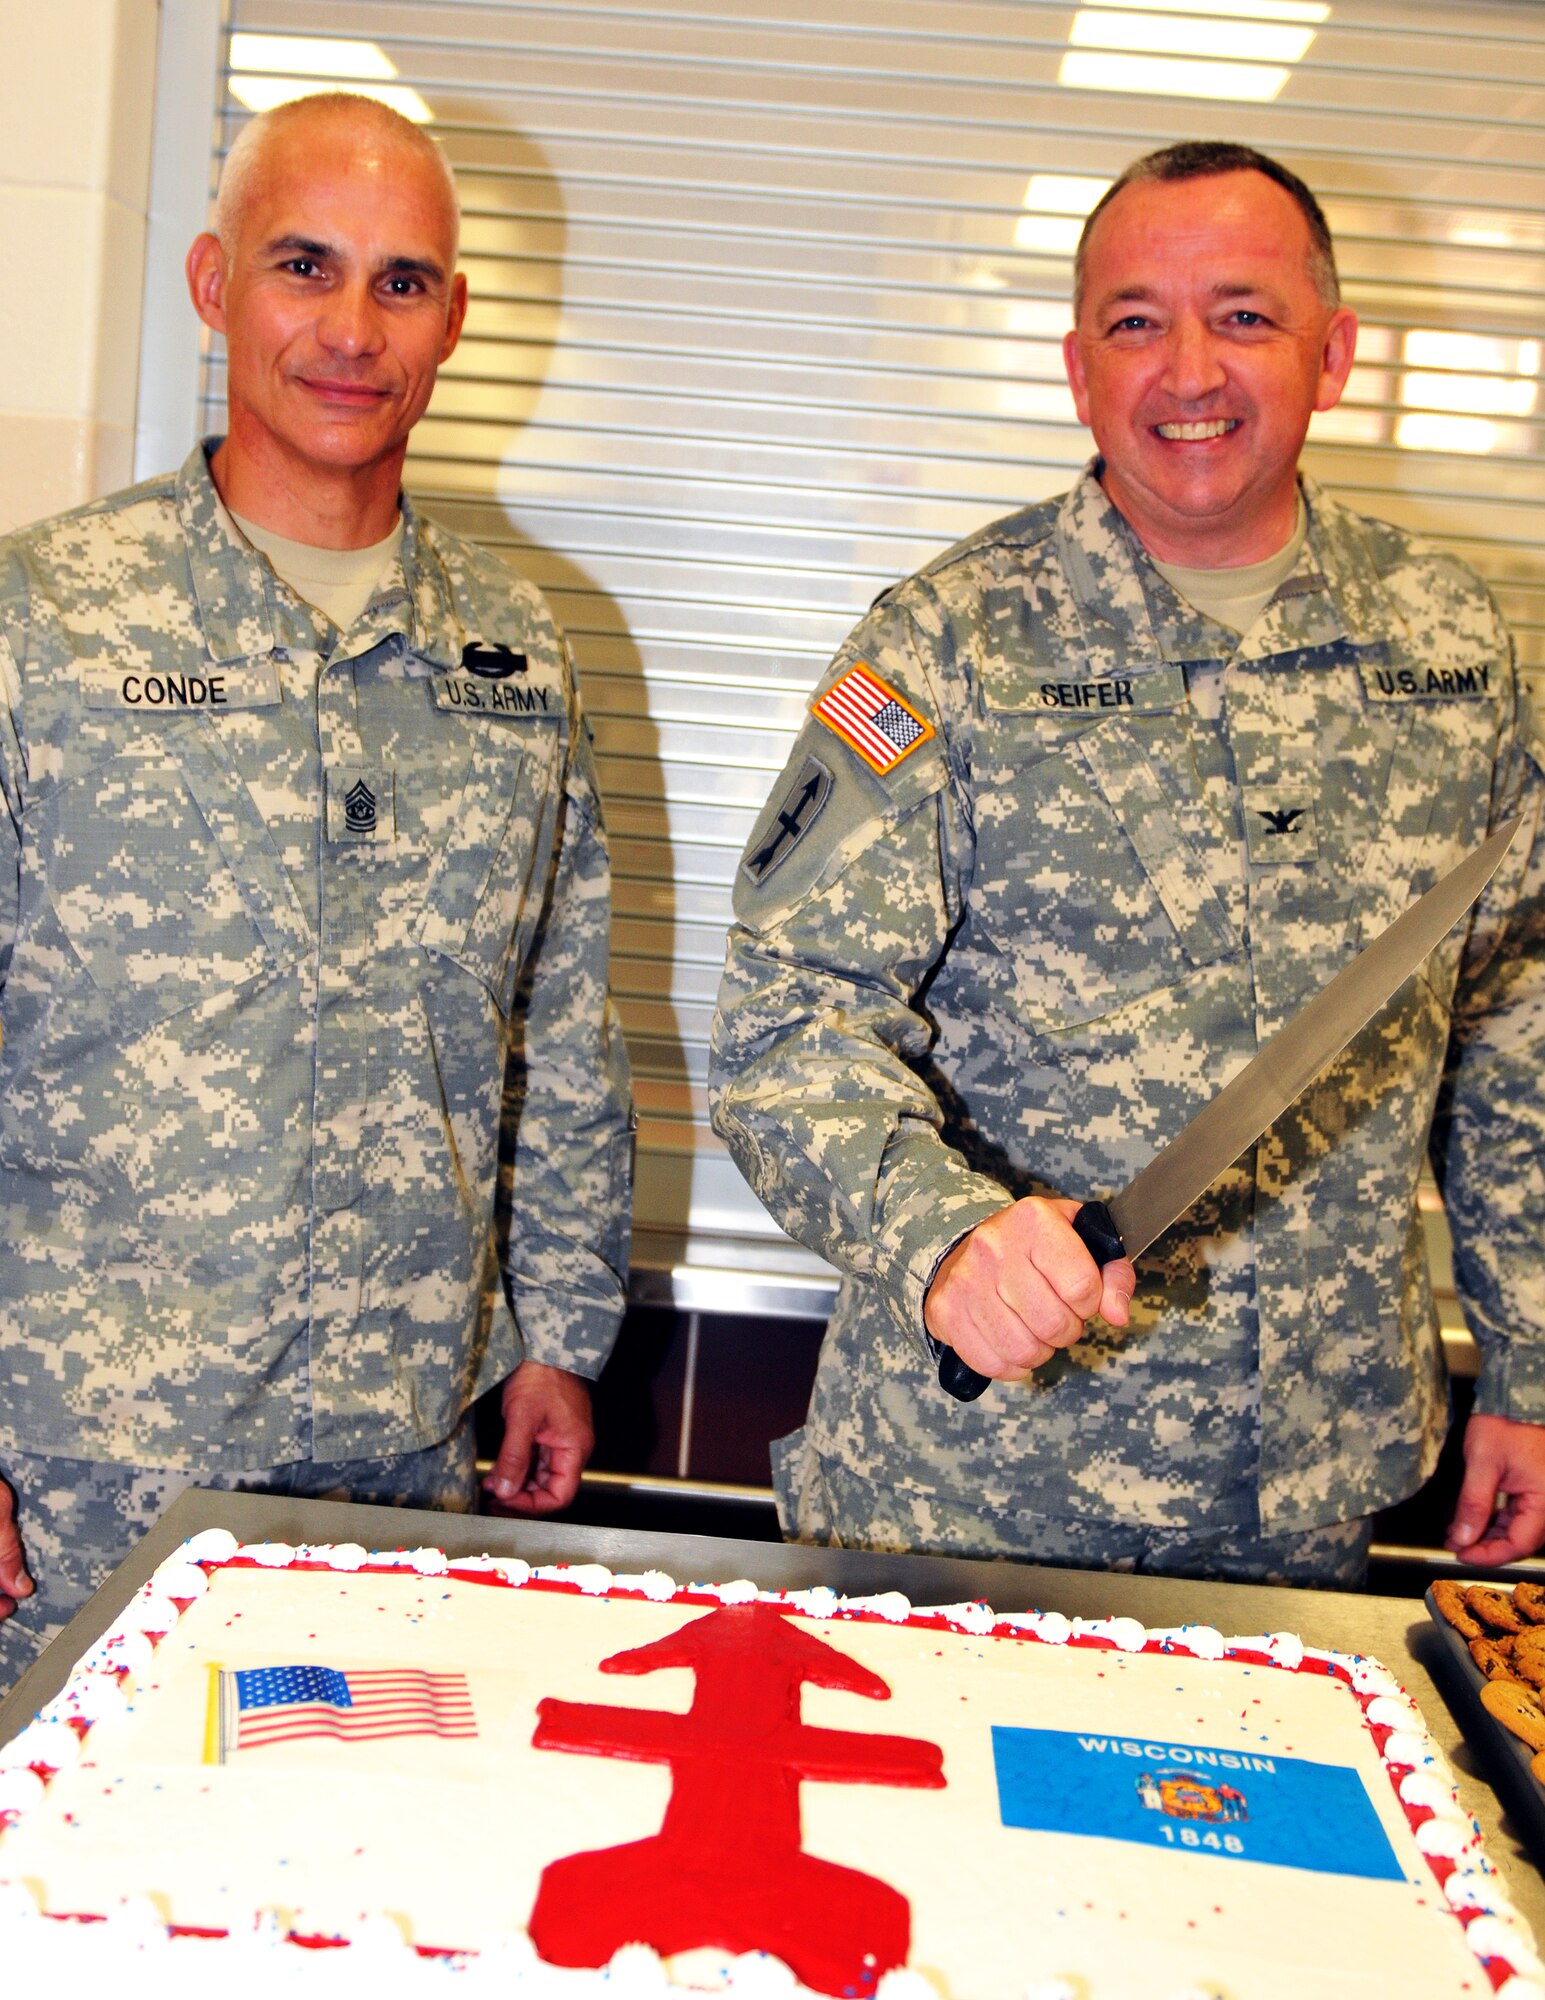 Command Sgt. Maj. Rafael Conde and Col. Martin Seifer, 32nd Infantry Brigade Combat Team command sergeant major and commander, prepare to cut the official cake during a change-of-command ceremony at Camp Williams July 10. Wisconsin National Guard photo by Tech. Sgt. Jon LaDue 
